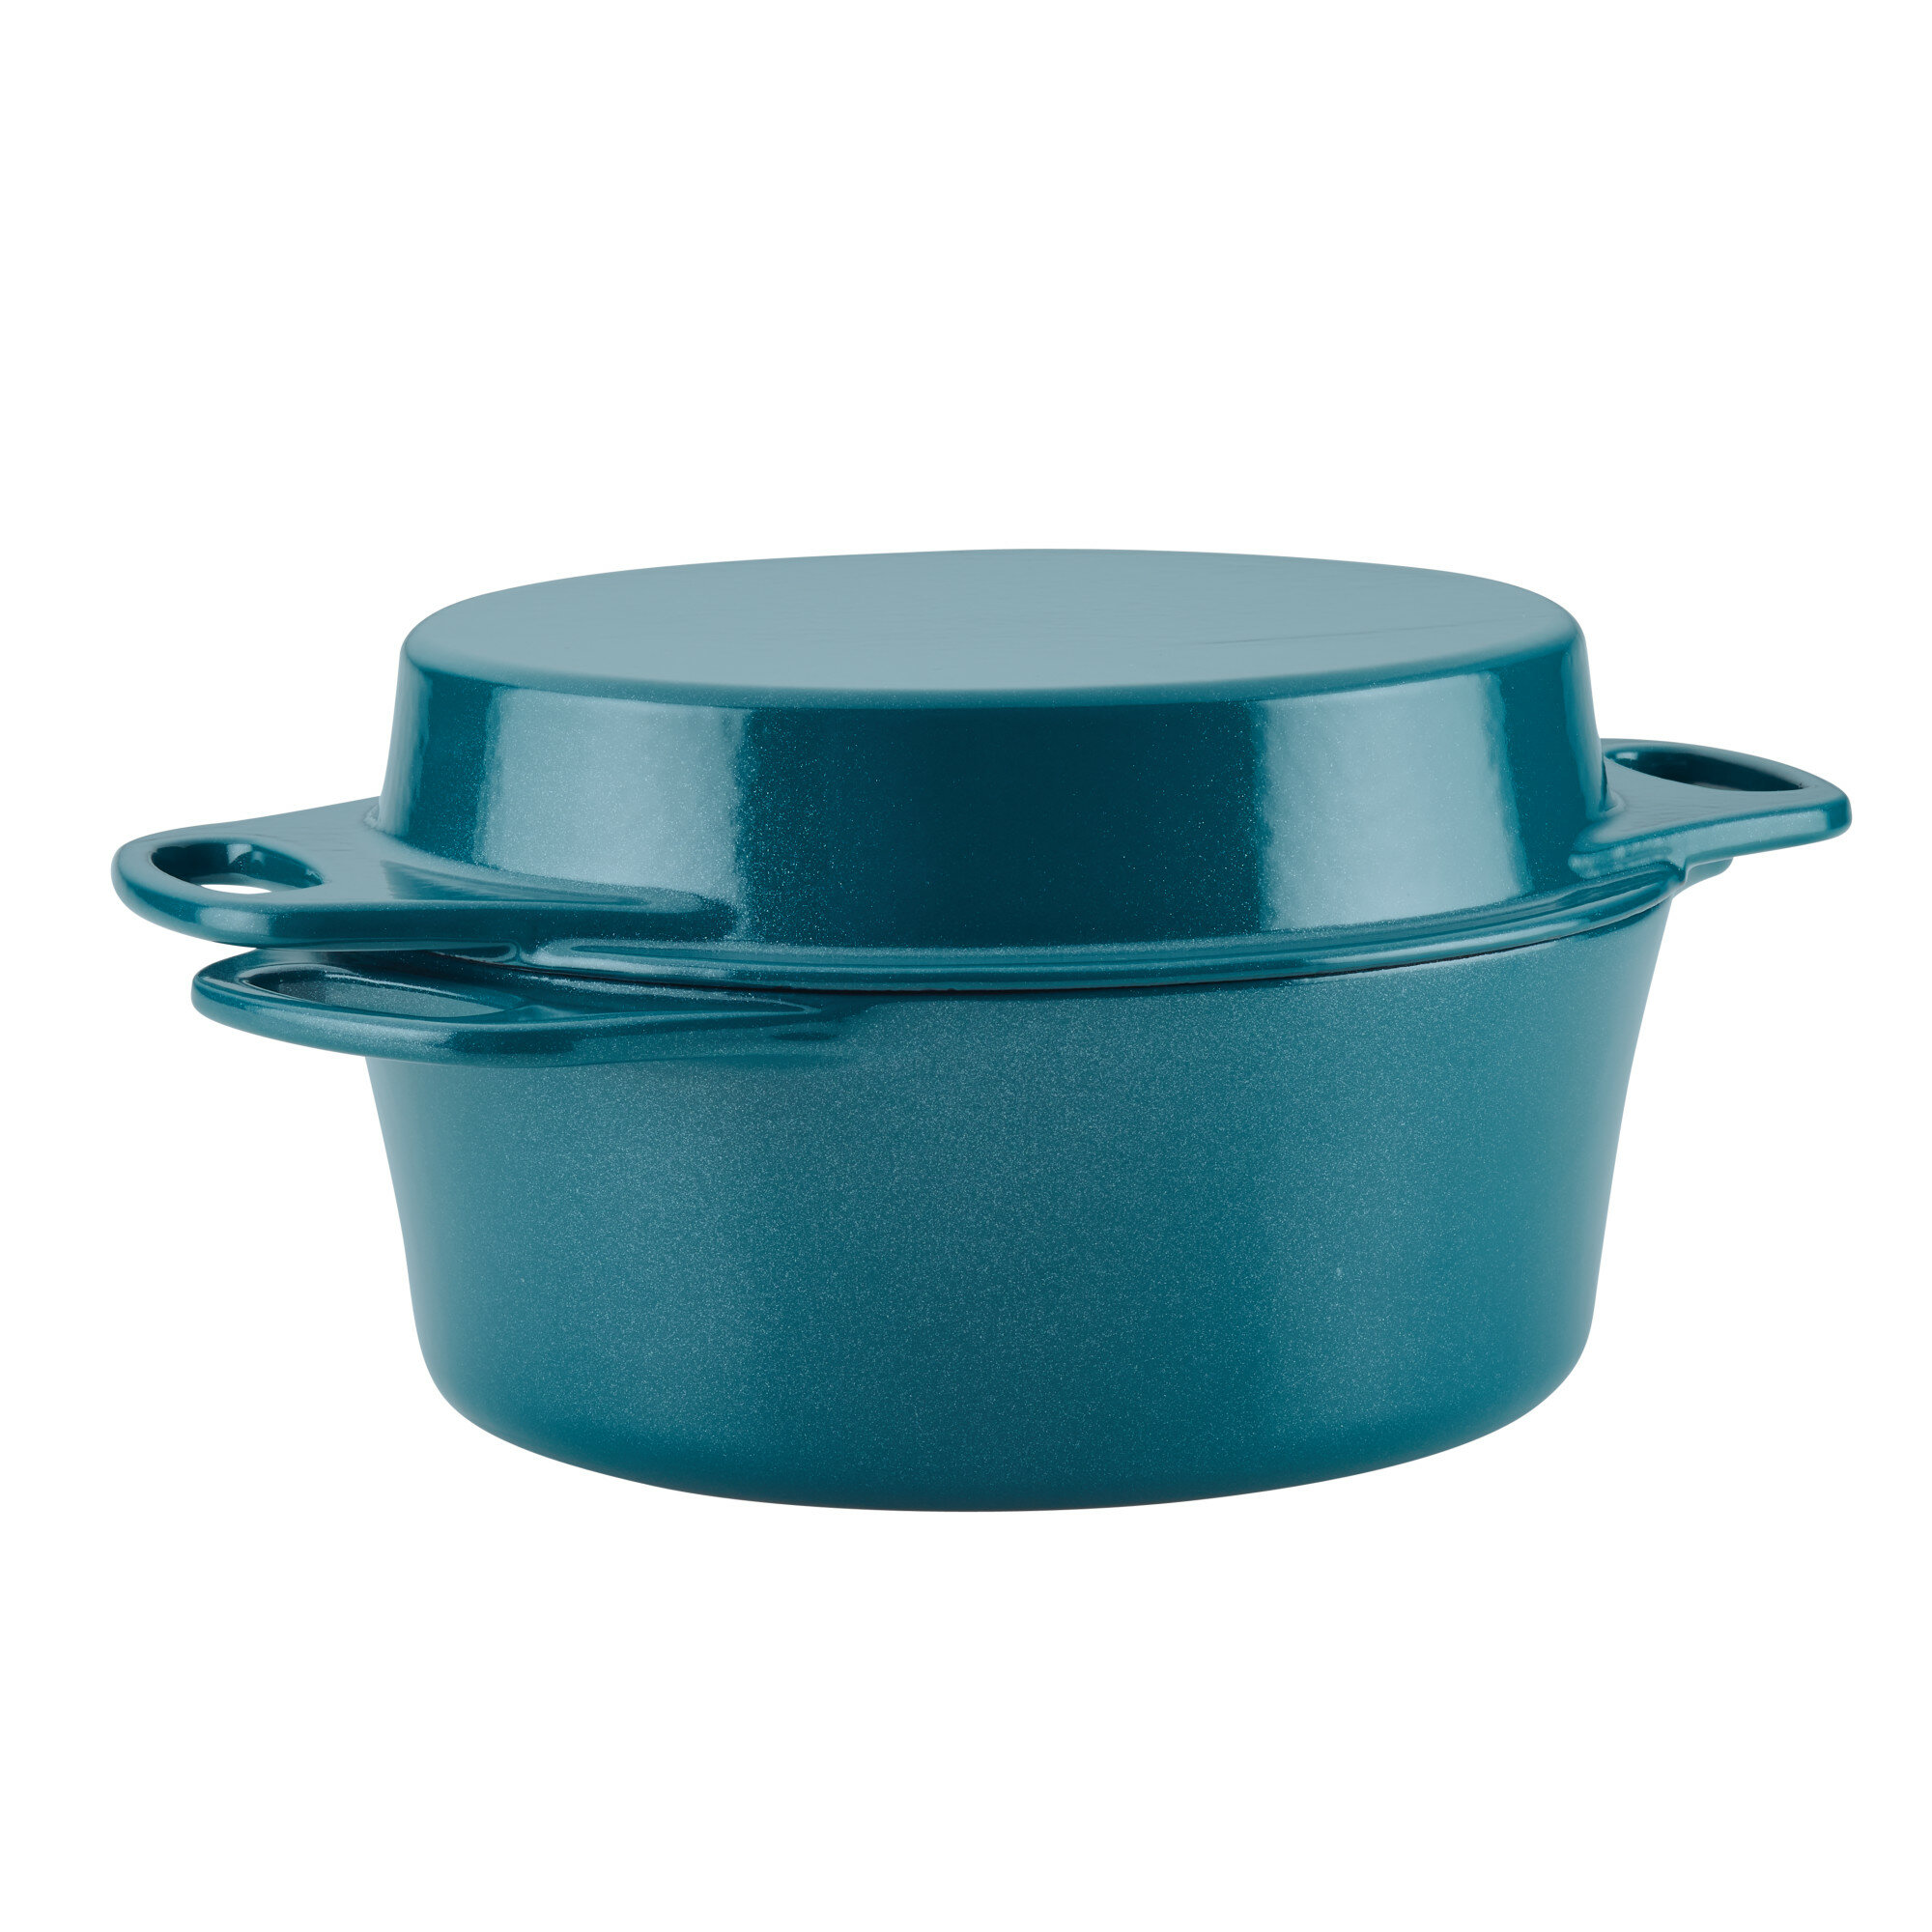 8-Piece Enameled Stacking Cookware Set - Teal Shimmer, Rachael Ray